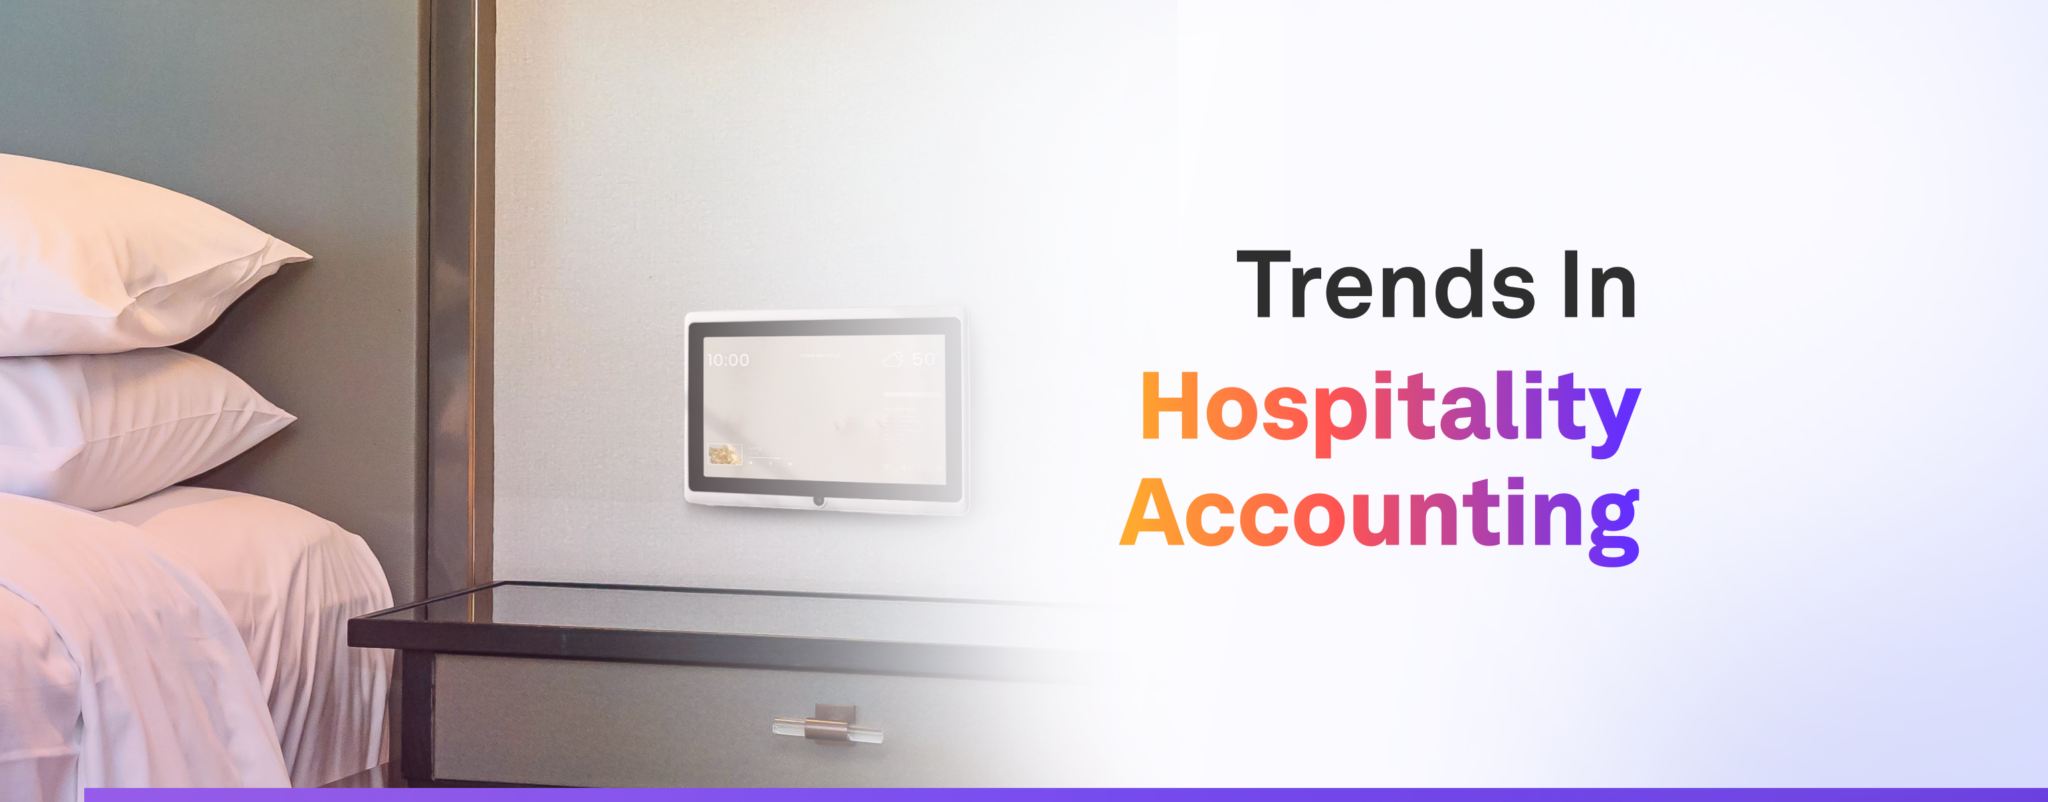 5 Hospitality Accounting Trends Technology